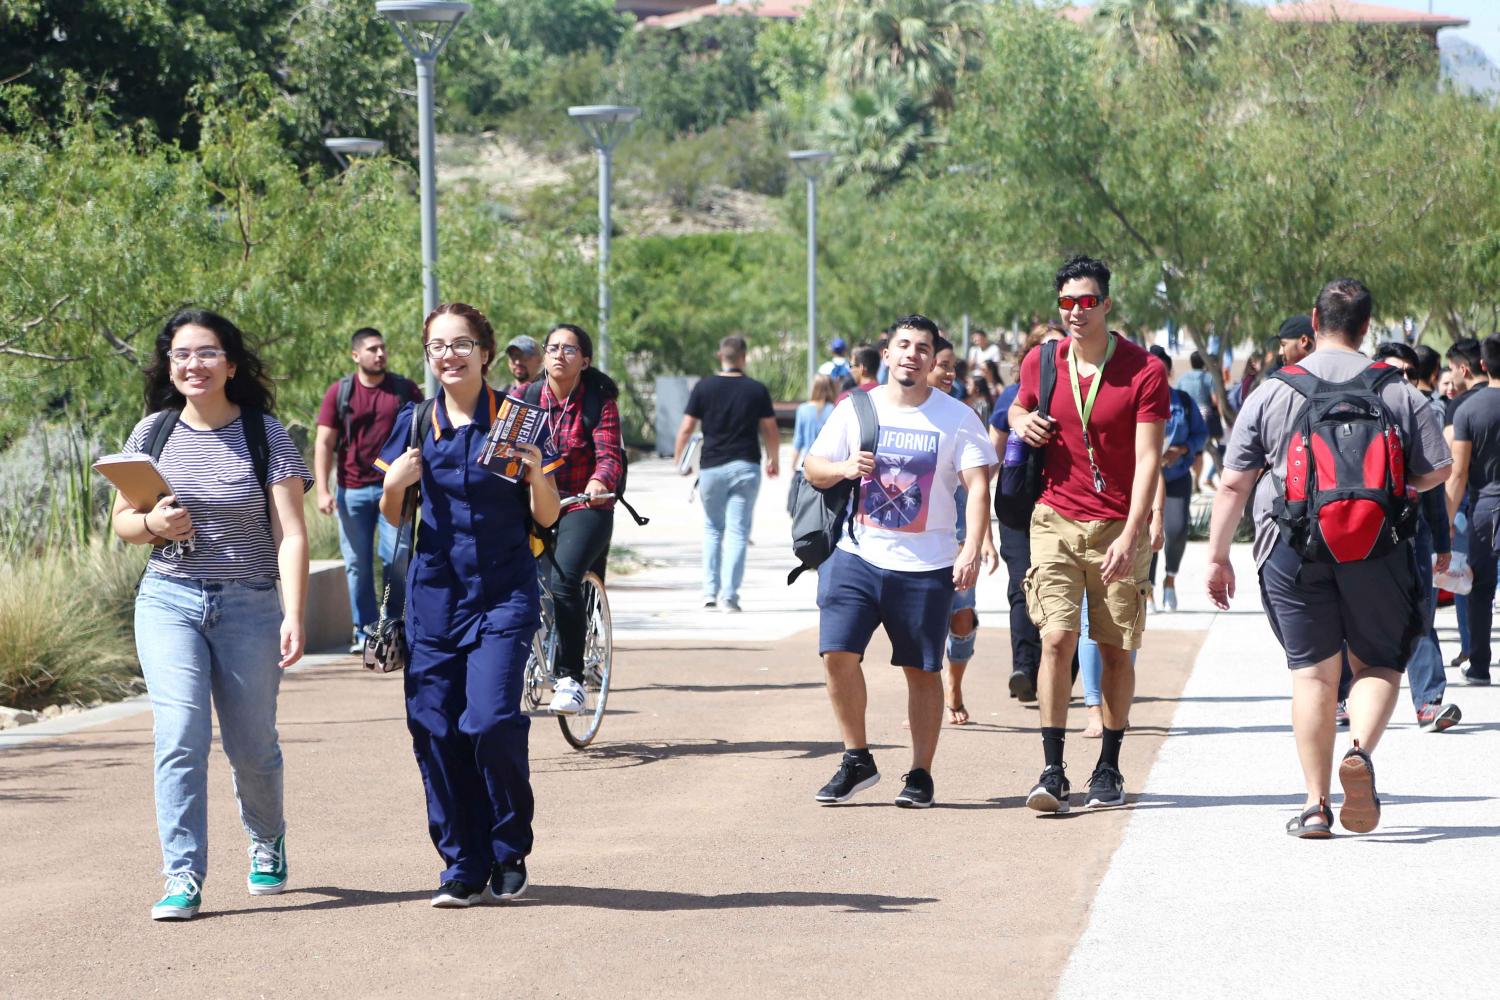 UTEP enrollment increases for the 19th consecutive year